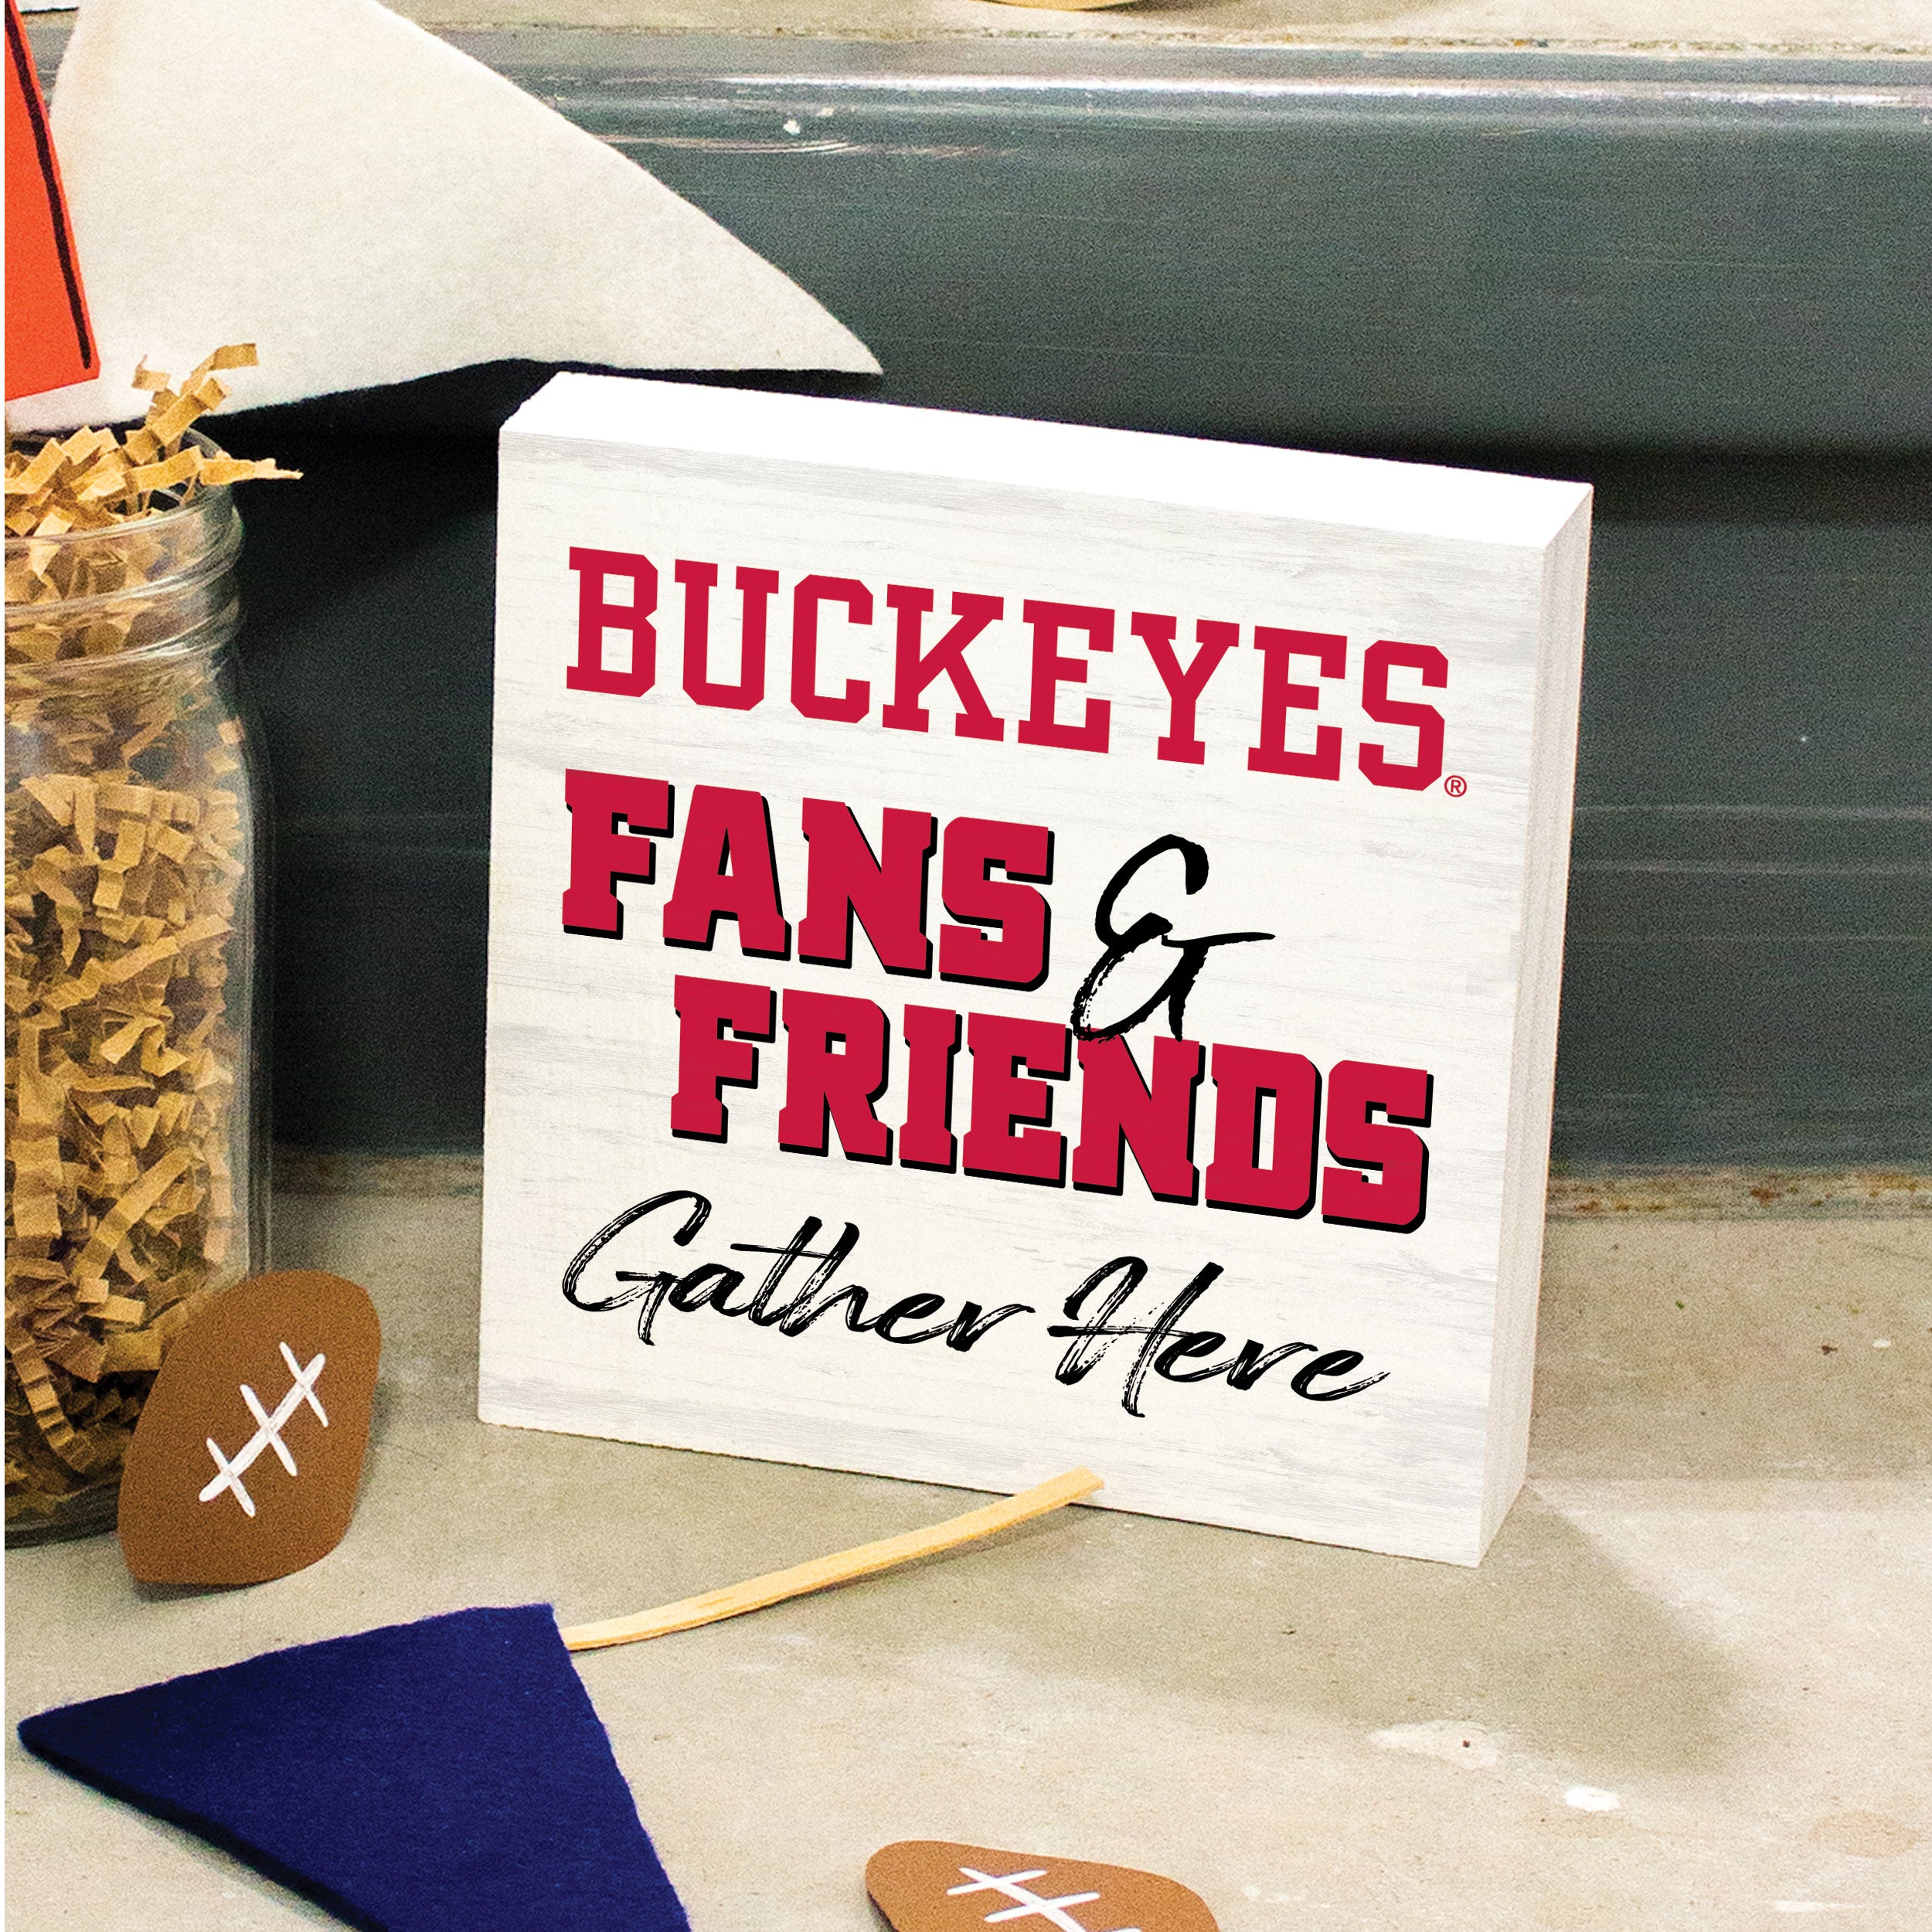 Fans & Friends Gather Here - The Ohio State University Word Blocks